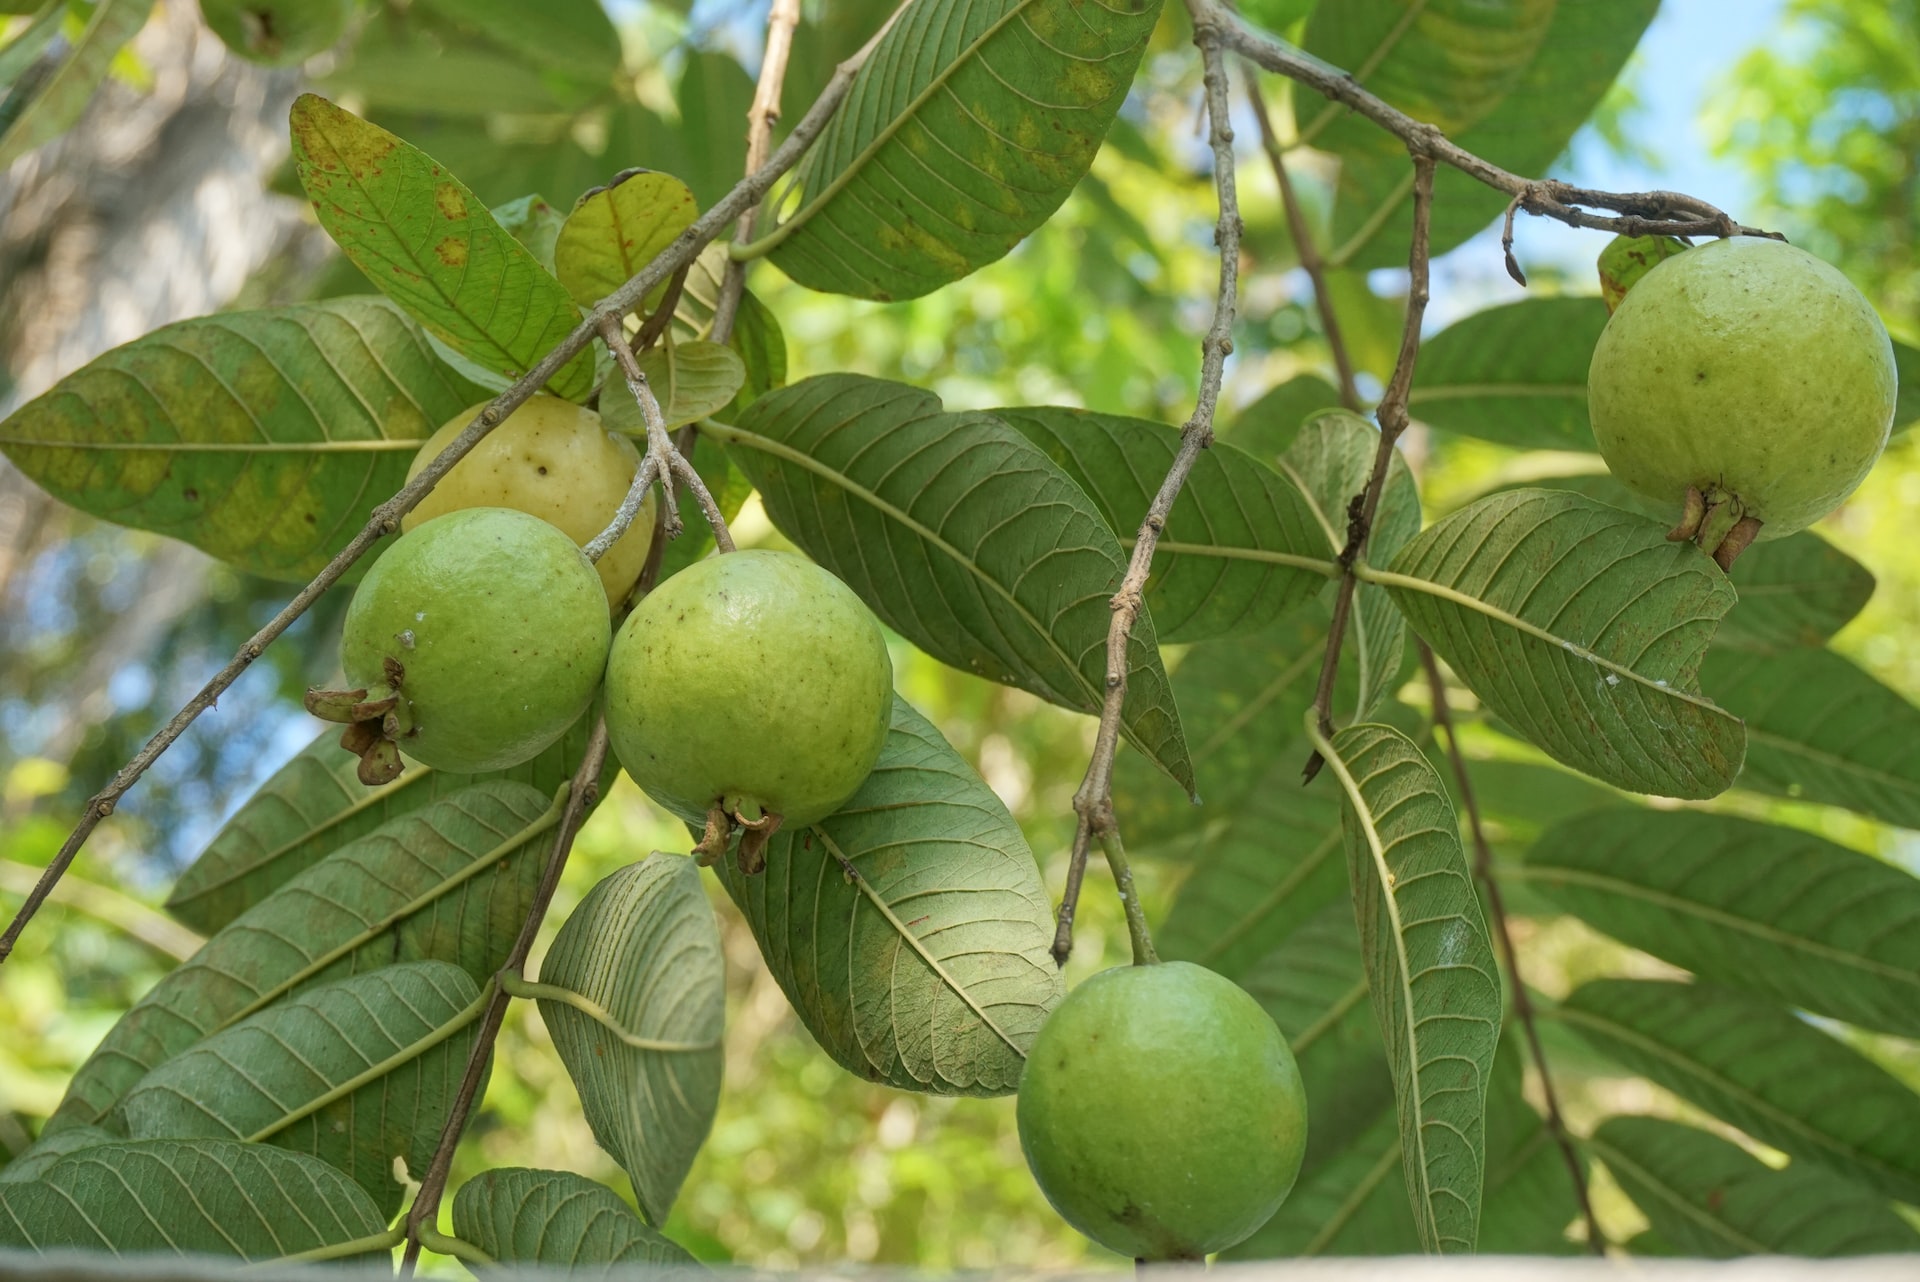 From Tropical Trees to Your Table: The Fascinating History of the Guava